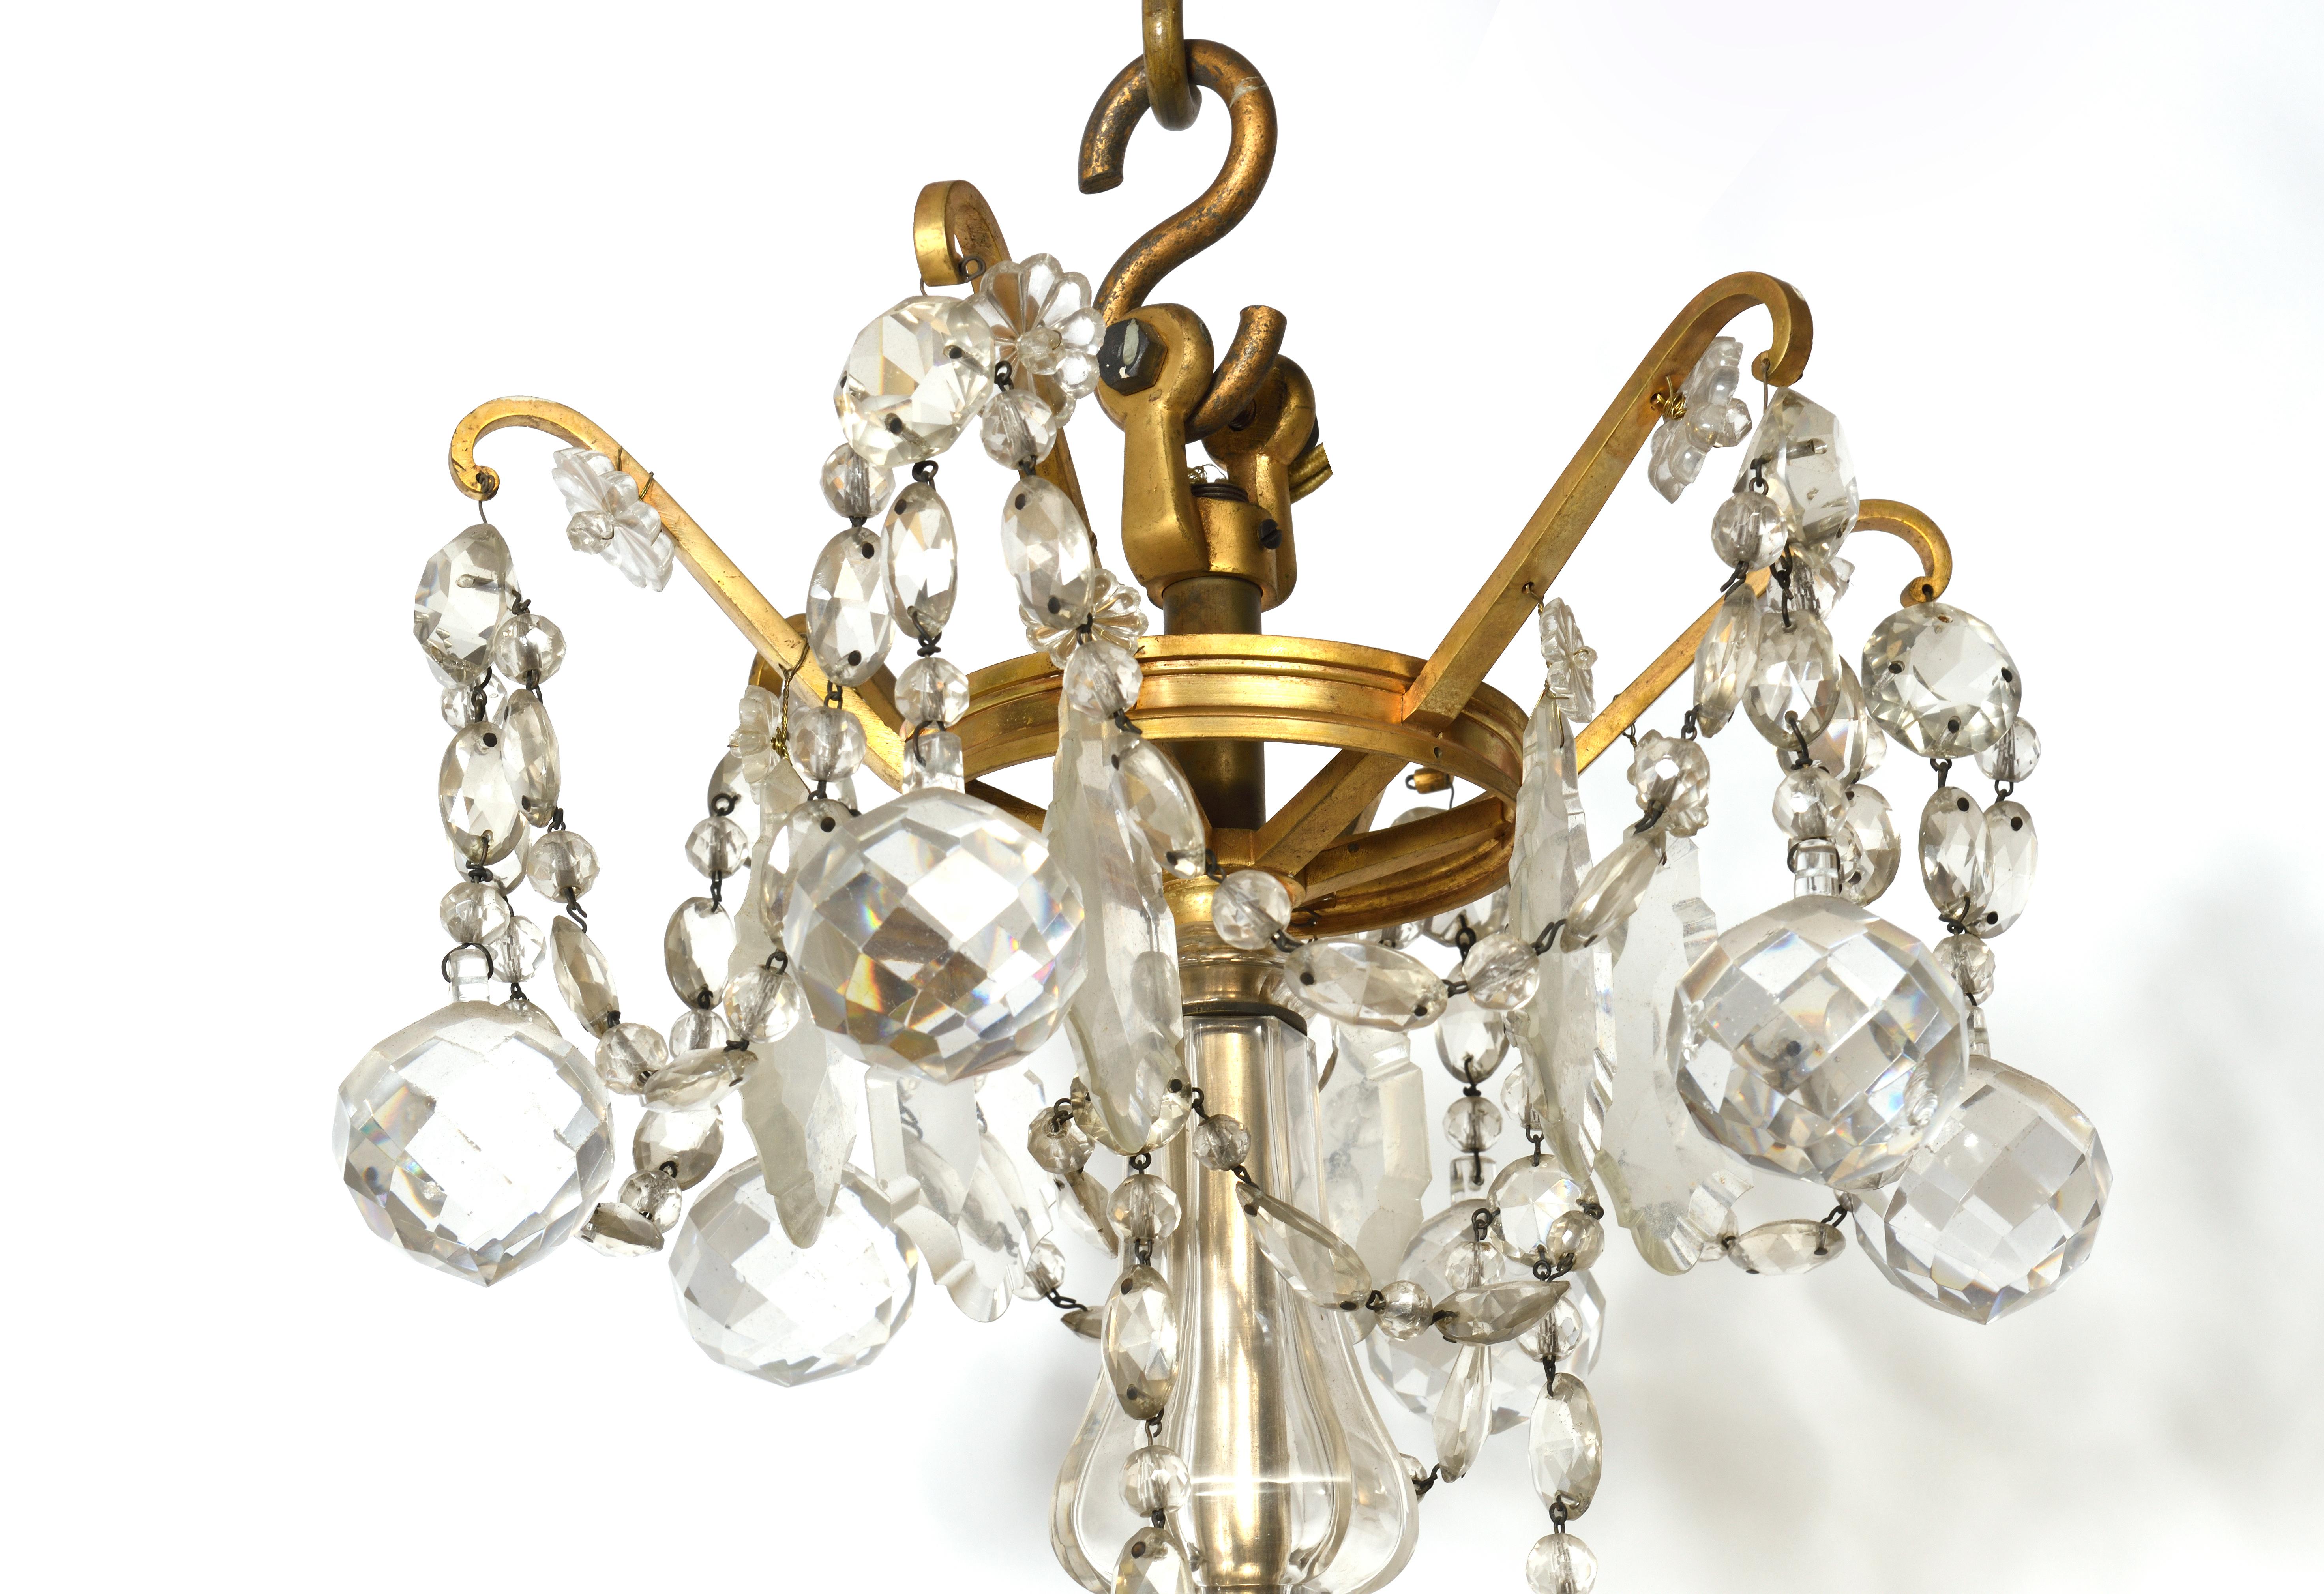 Top quality of chandelier in bronze and crystal Baccarat, this chandelier is very elegant and it can find a place in any room, any style of home because quality always find a place for decoration.